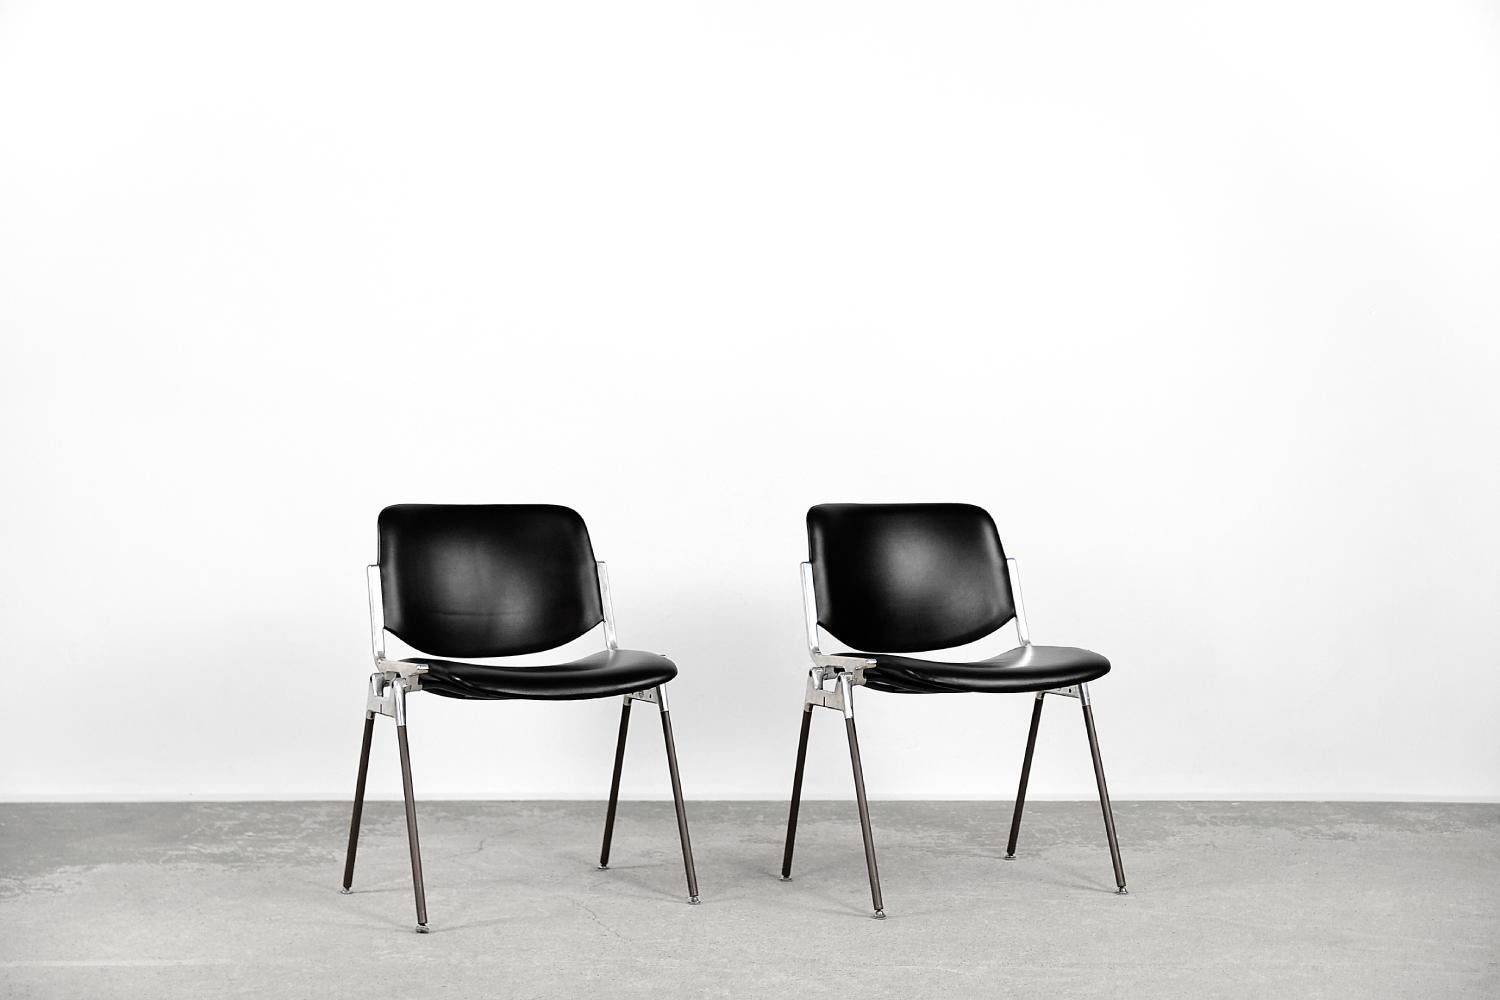 This set of two DSC 106 chairs was designed by Giancarla Piretti for the Italian Castelli in 1965. It is one of the best-known models of the brand's chairs and is still an object with an innovative and attractive design. The elegant interweaving of